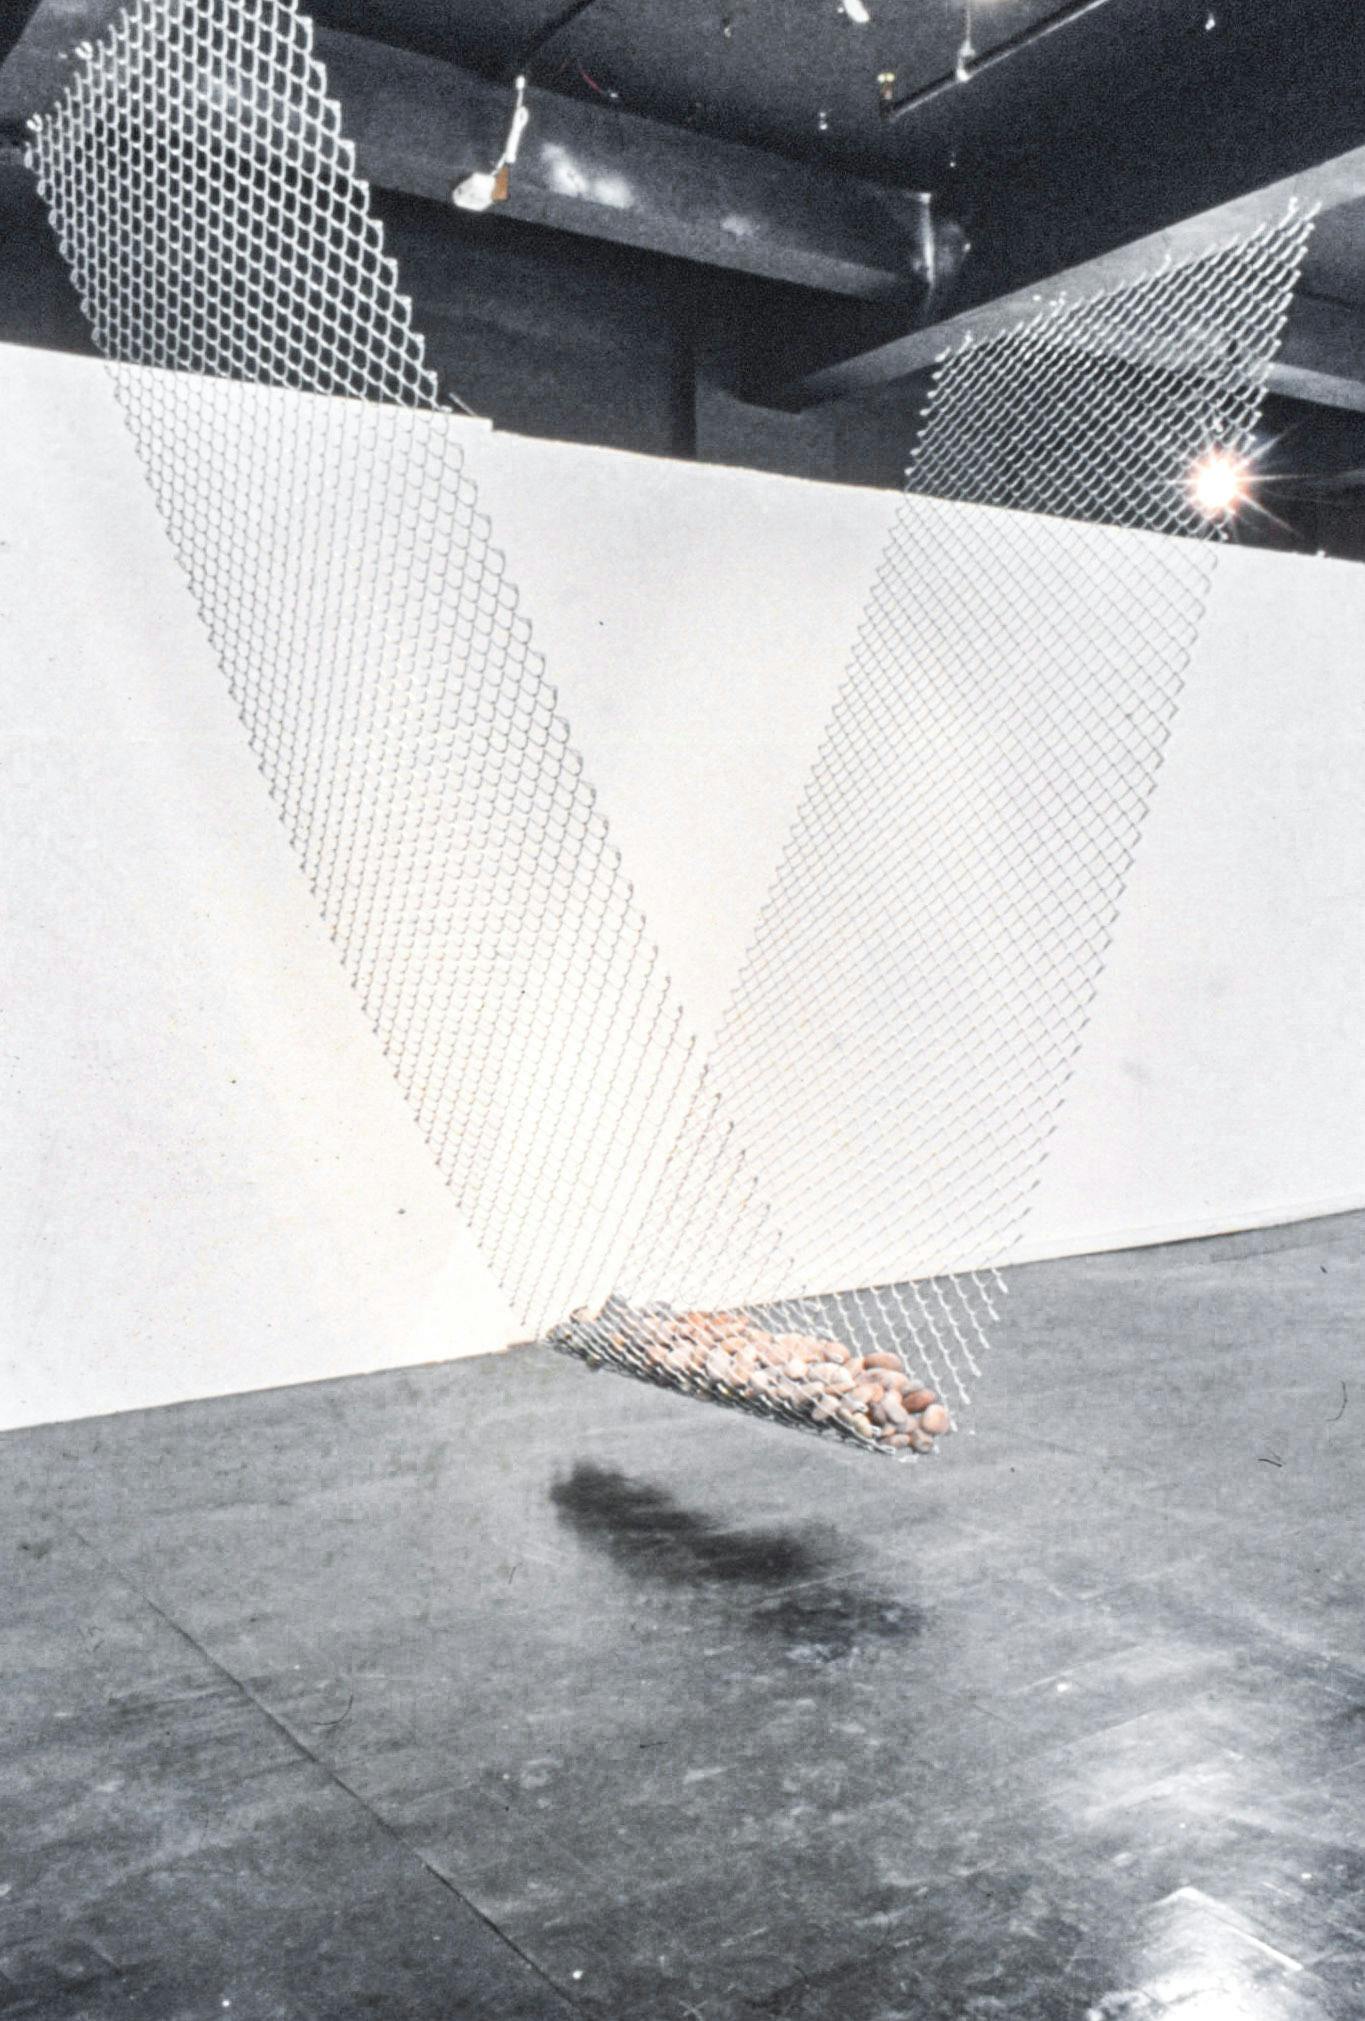 A closeup of an artwork in a gallery. The work is a large metal net suspended from the ceiling, with a row of small grey, white, and brown rocks resting in its middle.